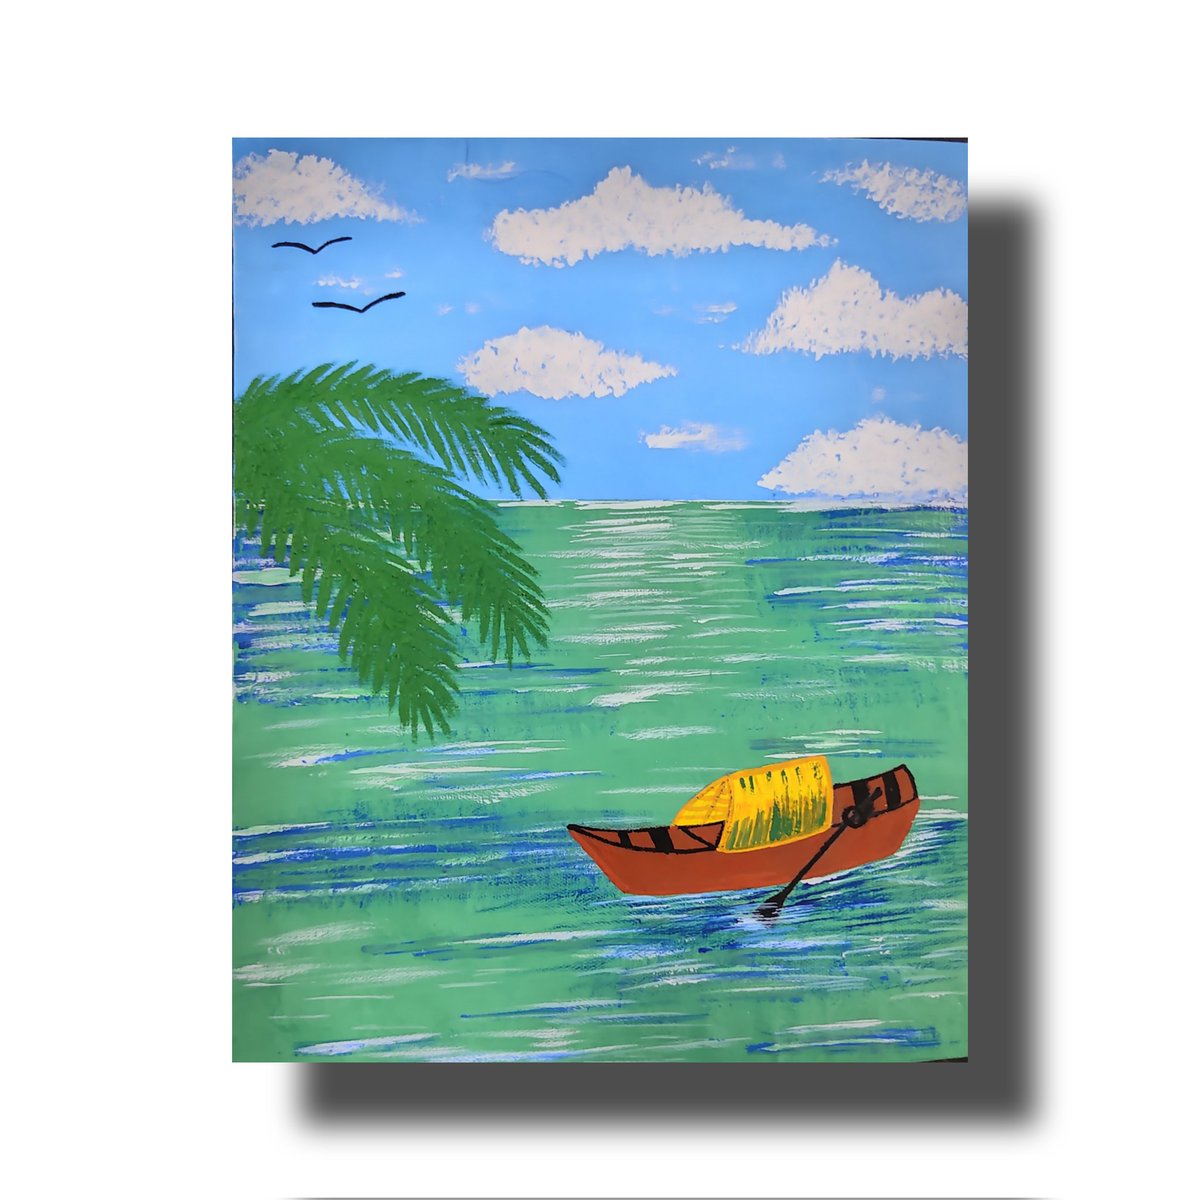 Sea painting🌊
Watercolor painting🎨
#painting #art #SEA #Seapainting #watercolor #watercolorpainting #boat #boating #Eagle #kite #Cloud #clouds #tree #coconuttree #coconut #Water #green #blue #Black #white #yellow #Brown #Sky #viral #post #X #artist #latest #new #nature